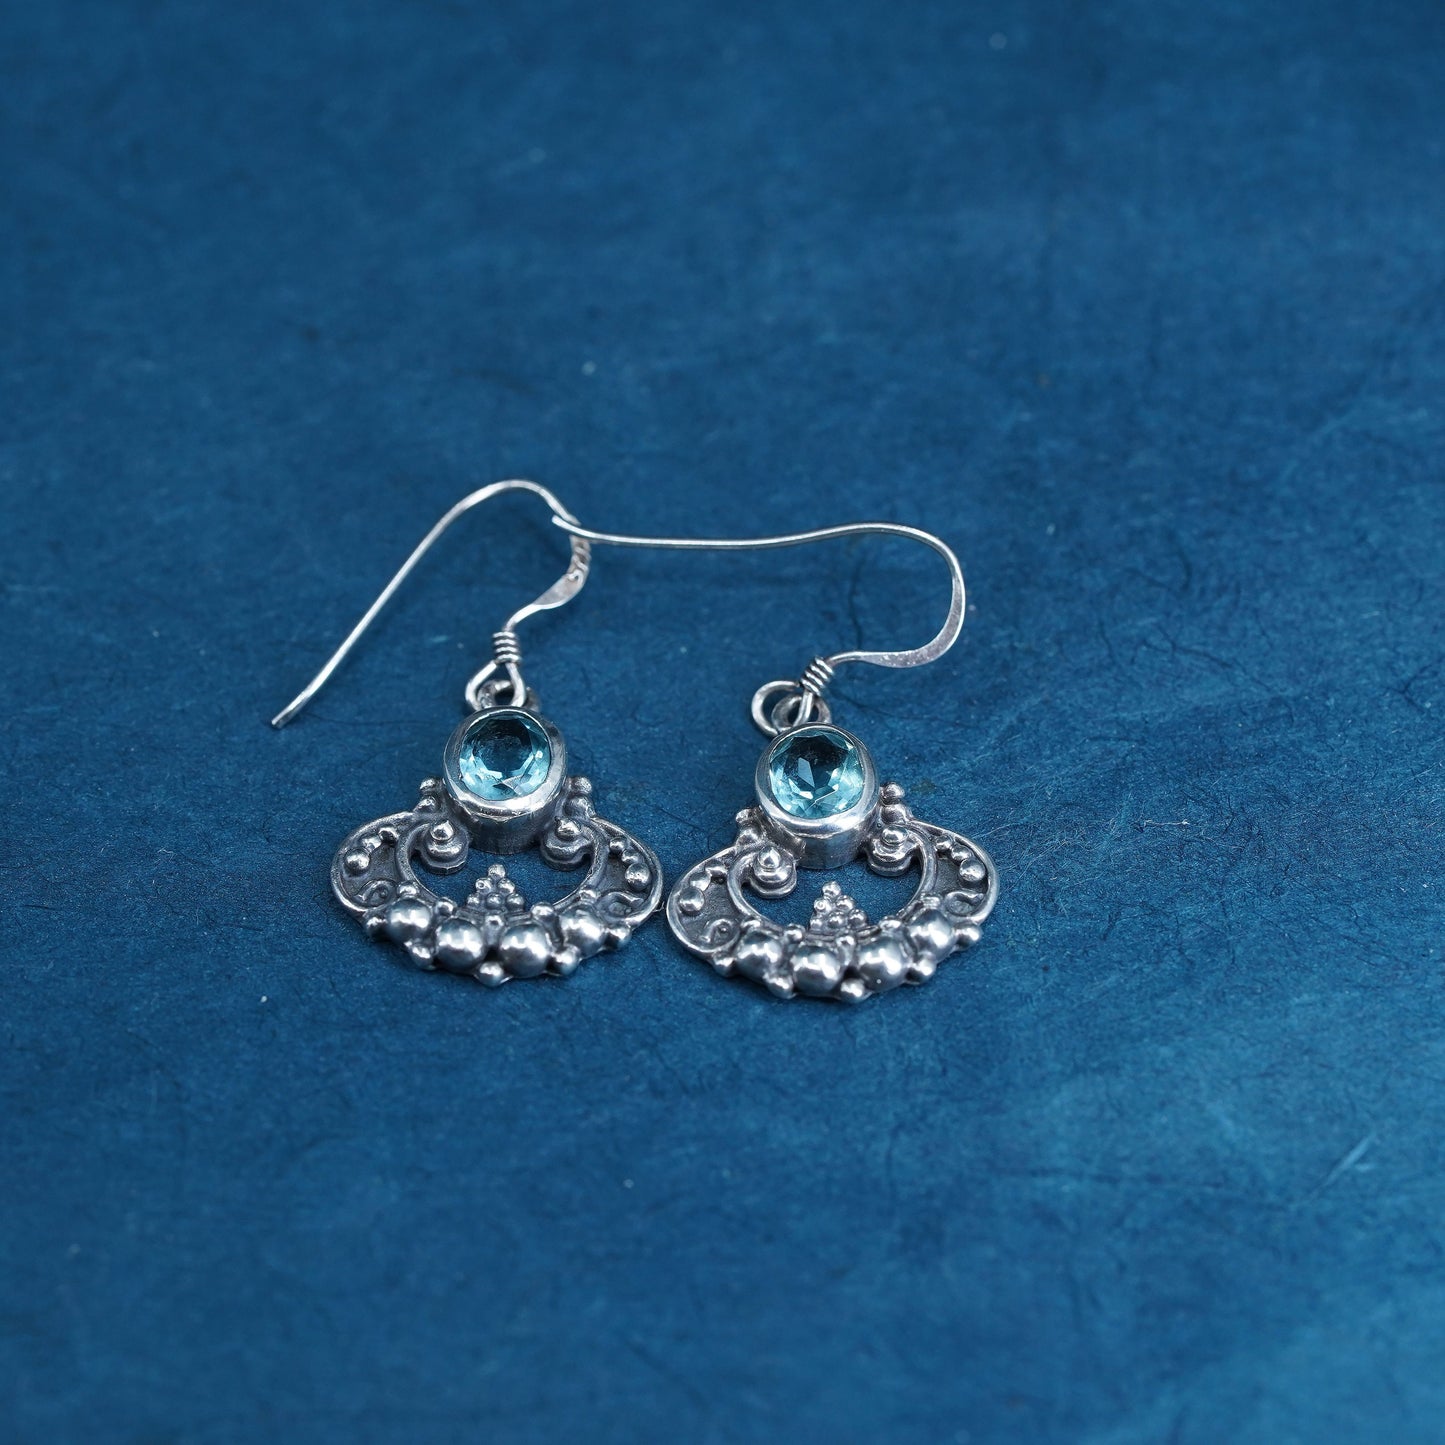 Sterling silver handmade cluster earrings, 925 dangles with blue crystal beads